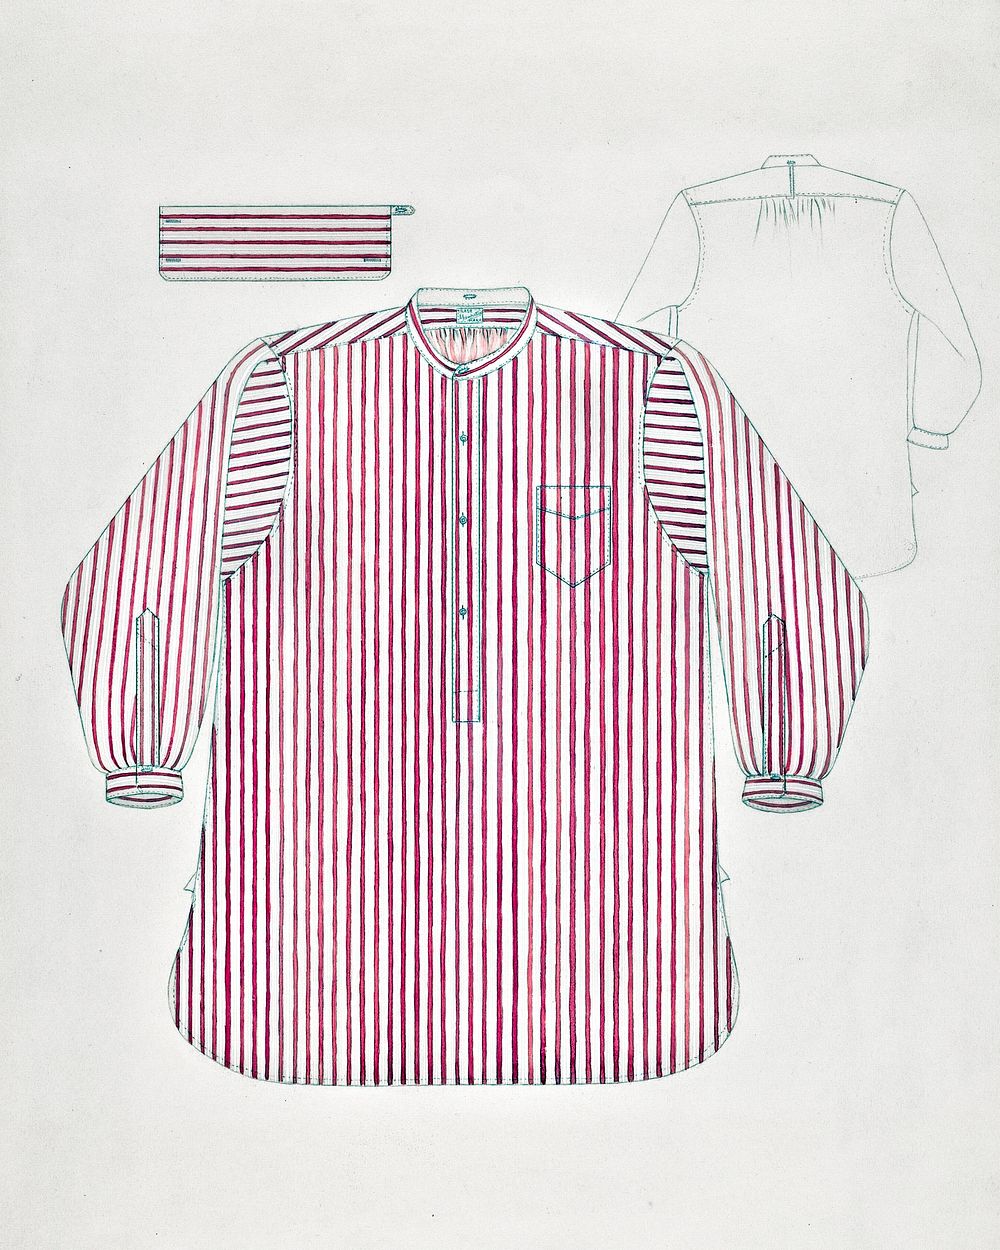 Shirt (c. 1937) by Virginia Berge. Original from The National Gallery of Art. Digitally enhanced by rawpixel.